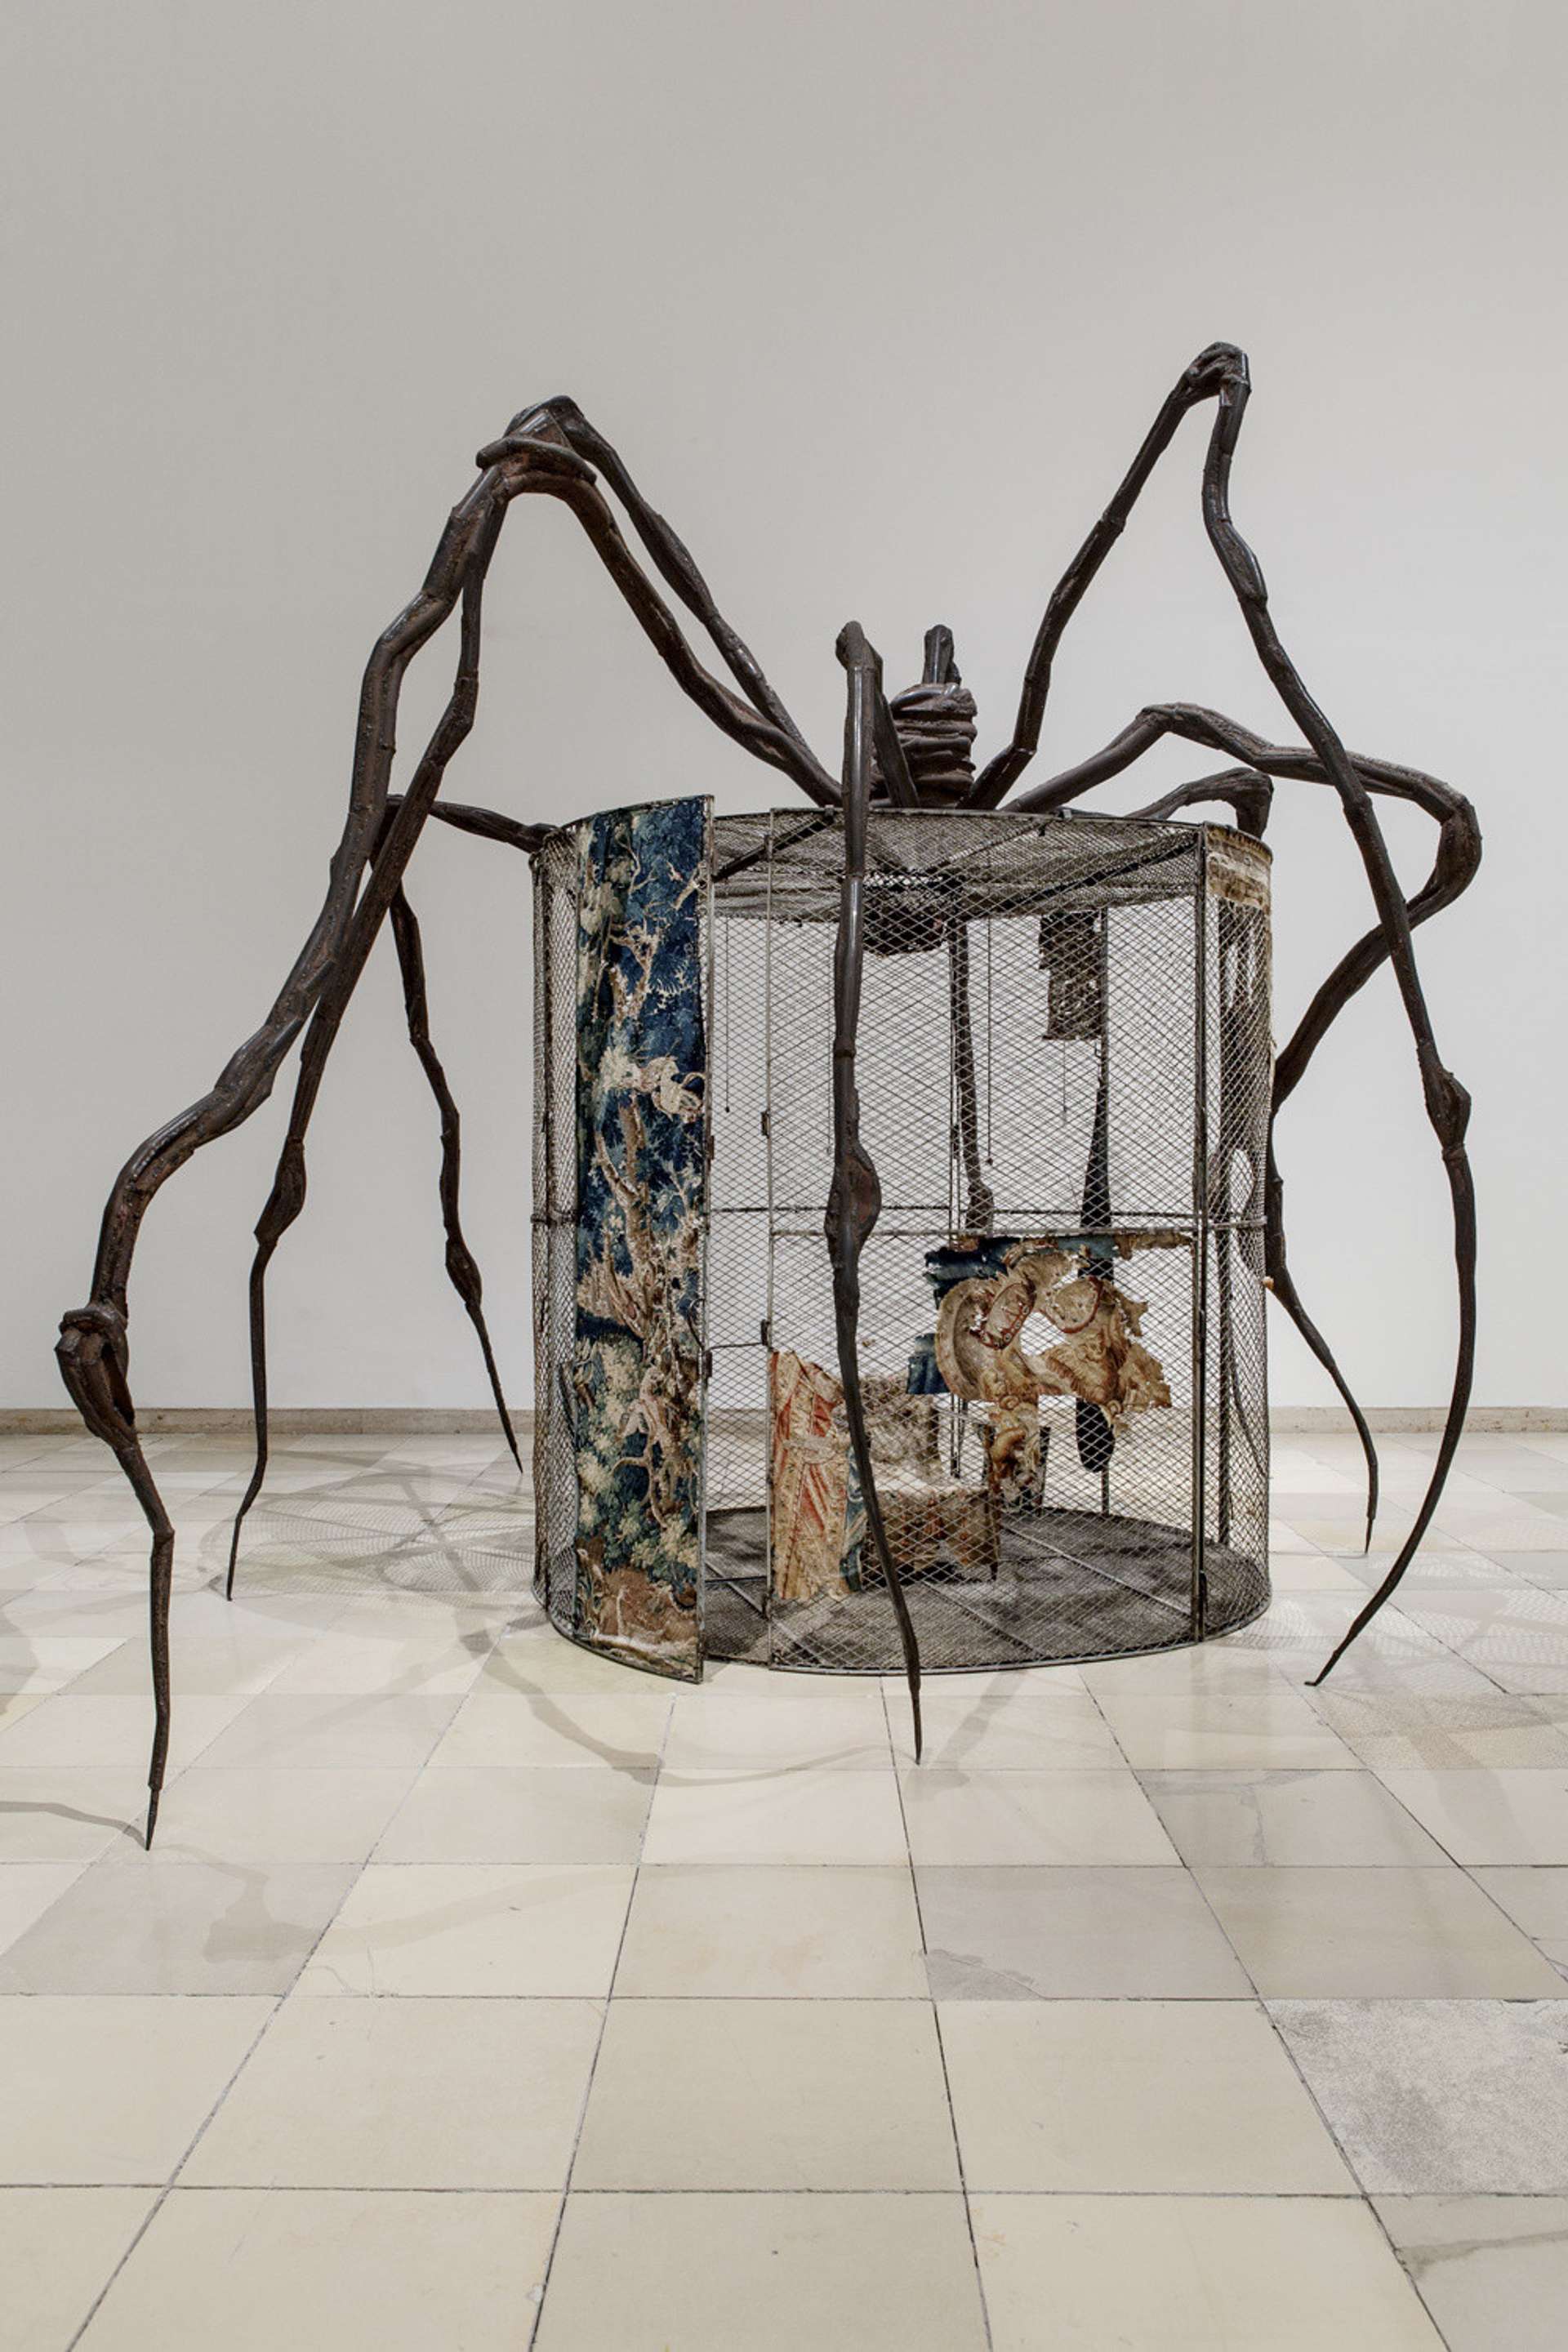 A spider sculpture by Louise Bourgeois engulfing a cage installation in a gallery.